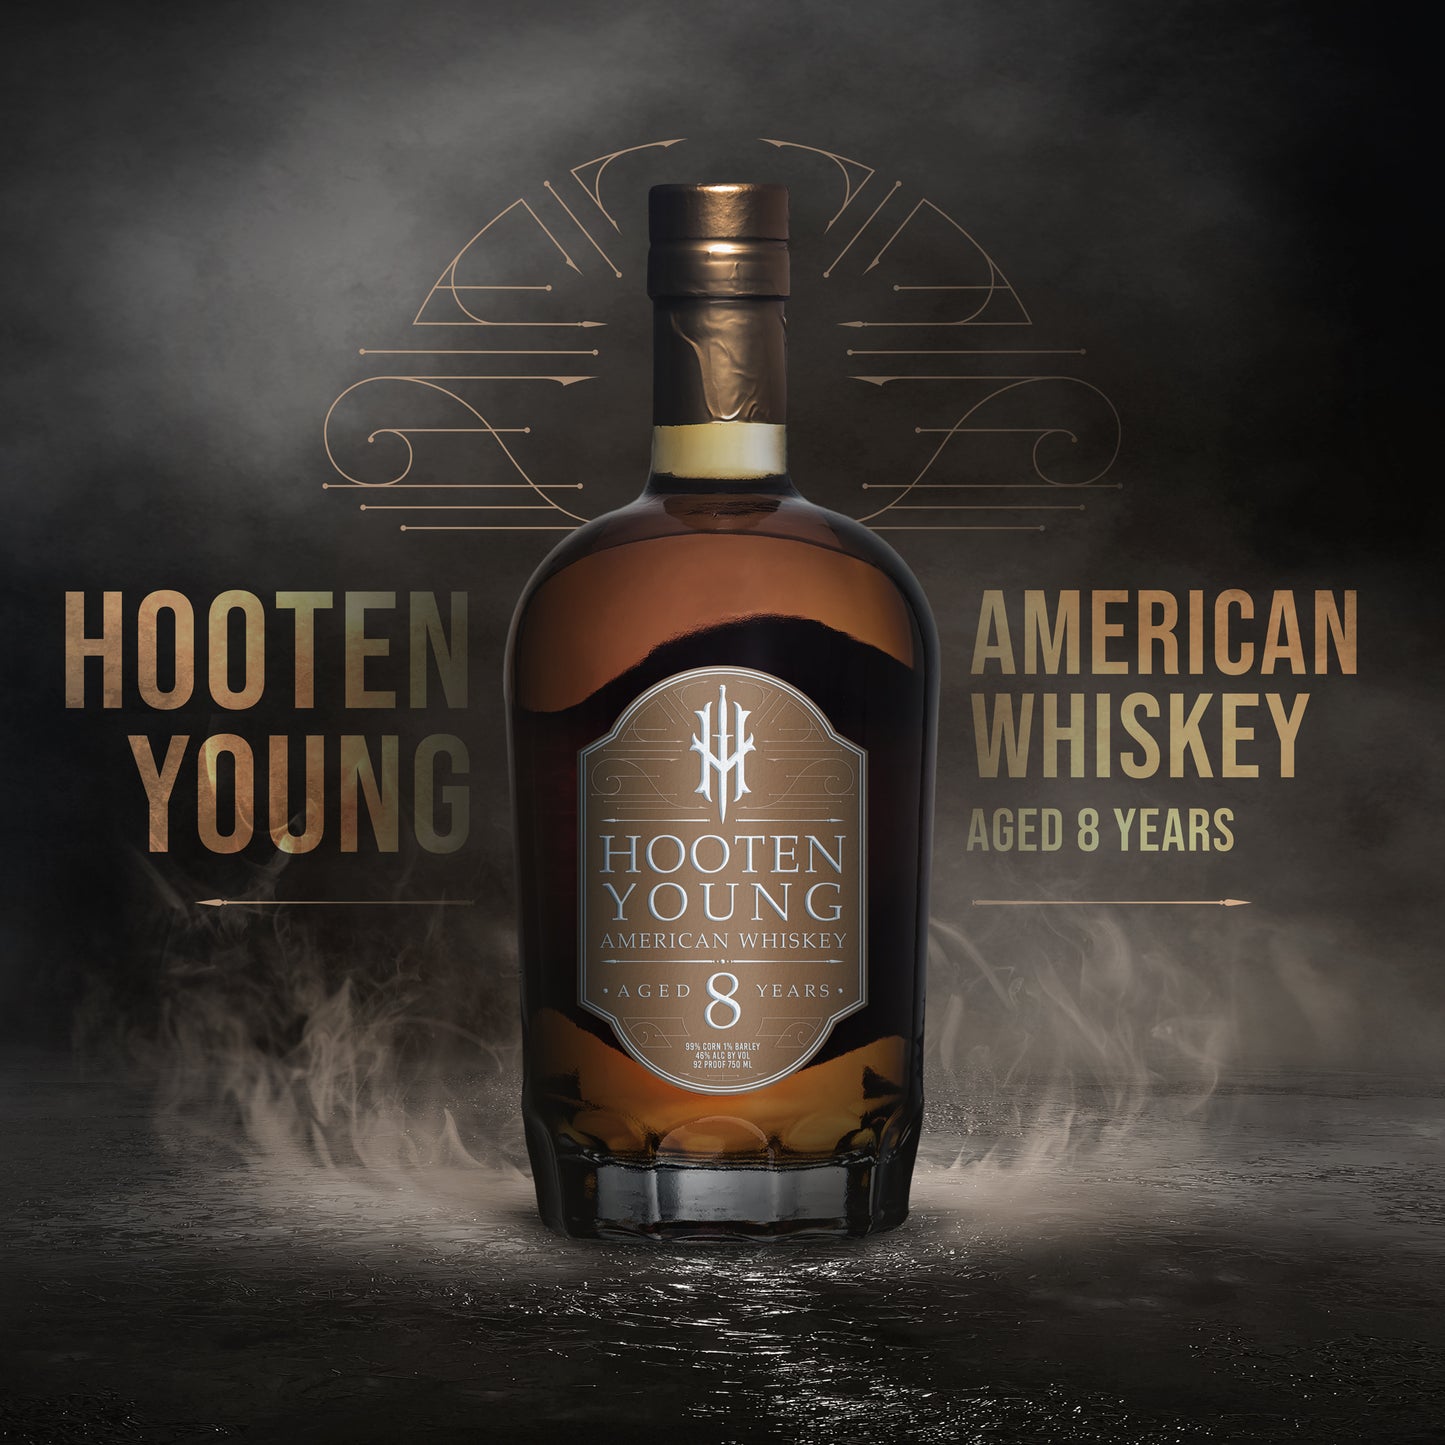 Hooten Young American Whiskey 8 year